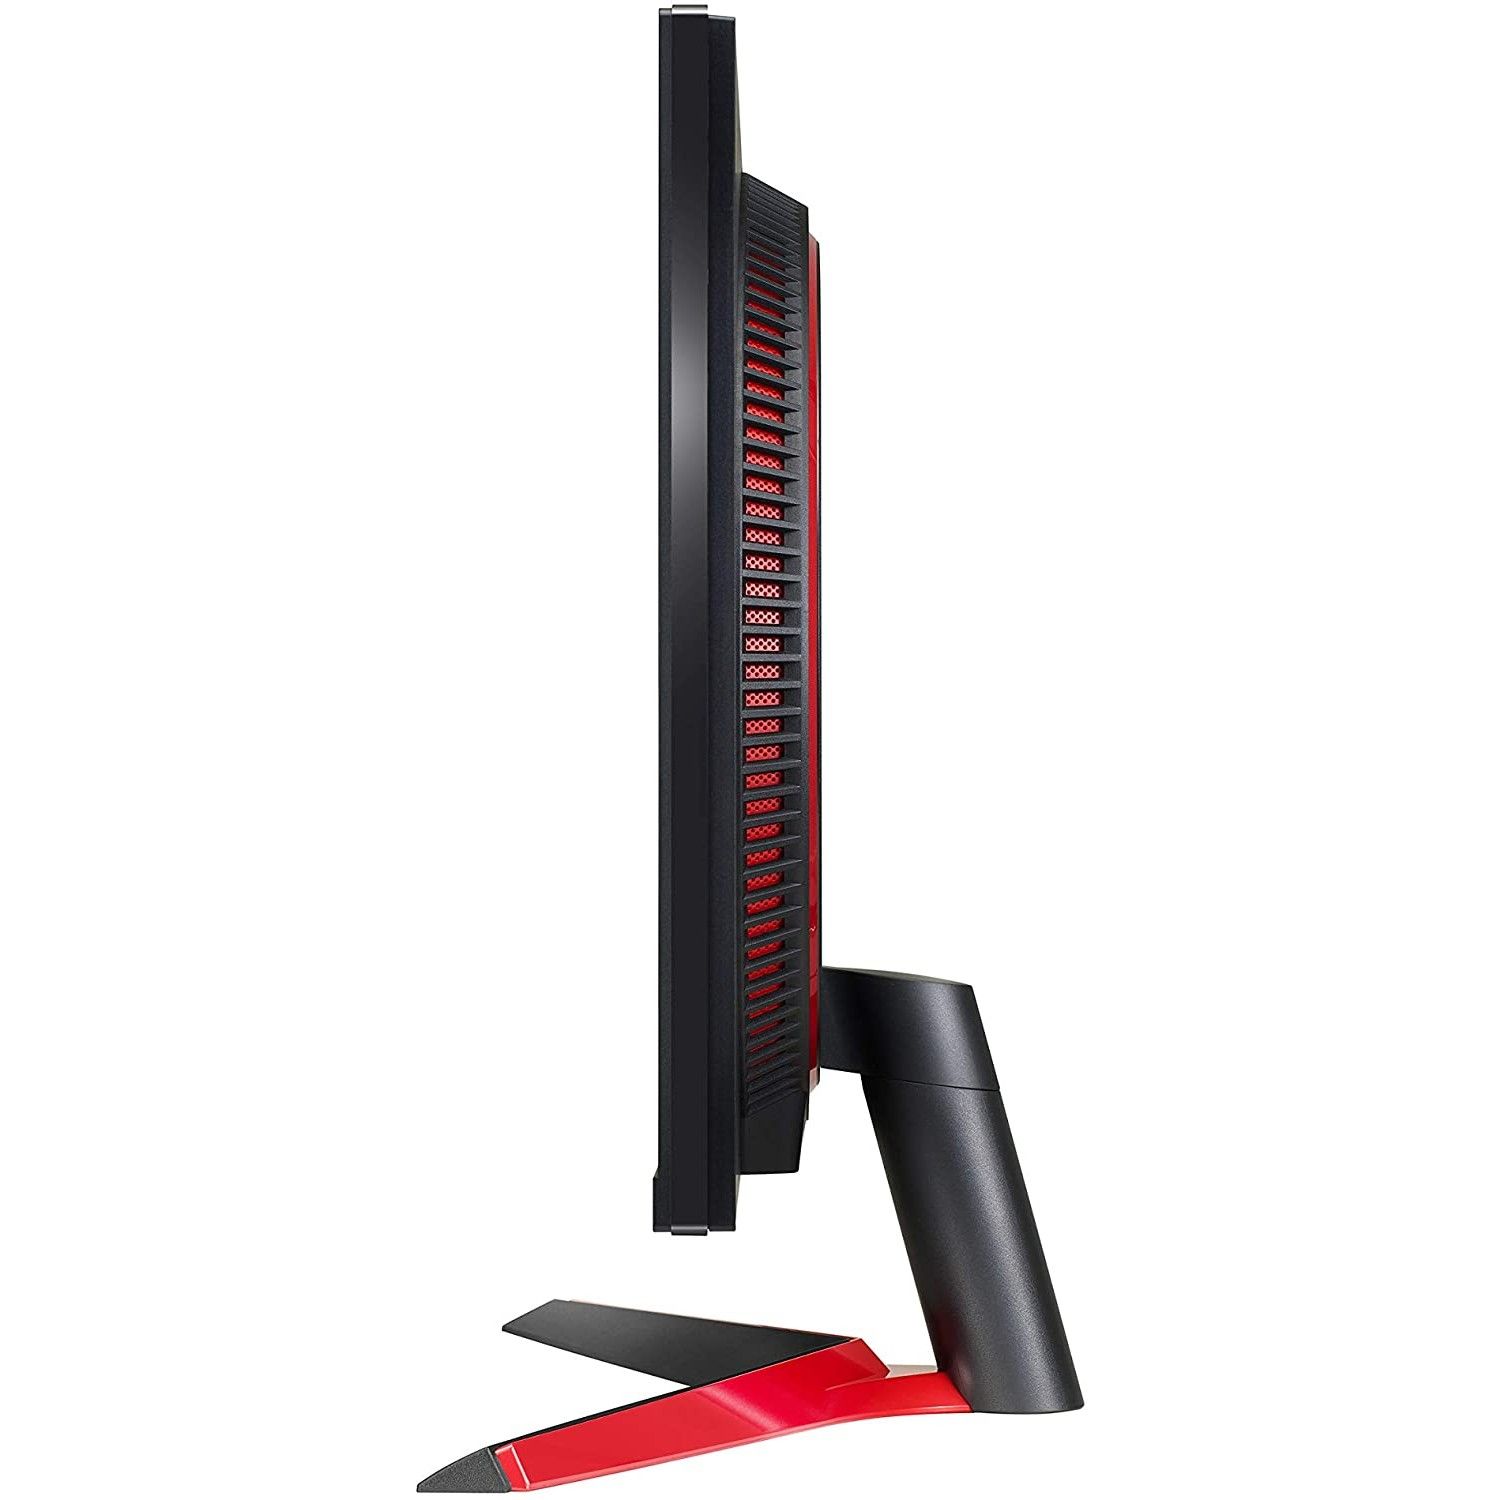 LG 27GN800-B stand